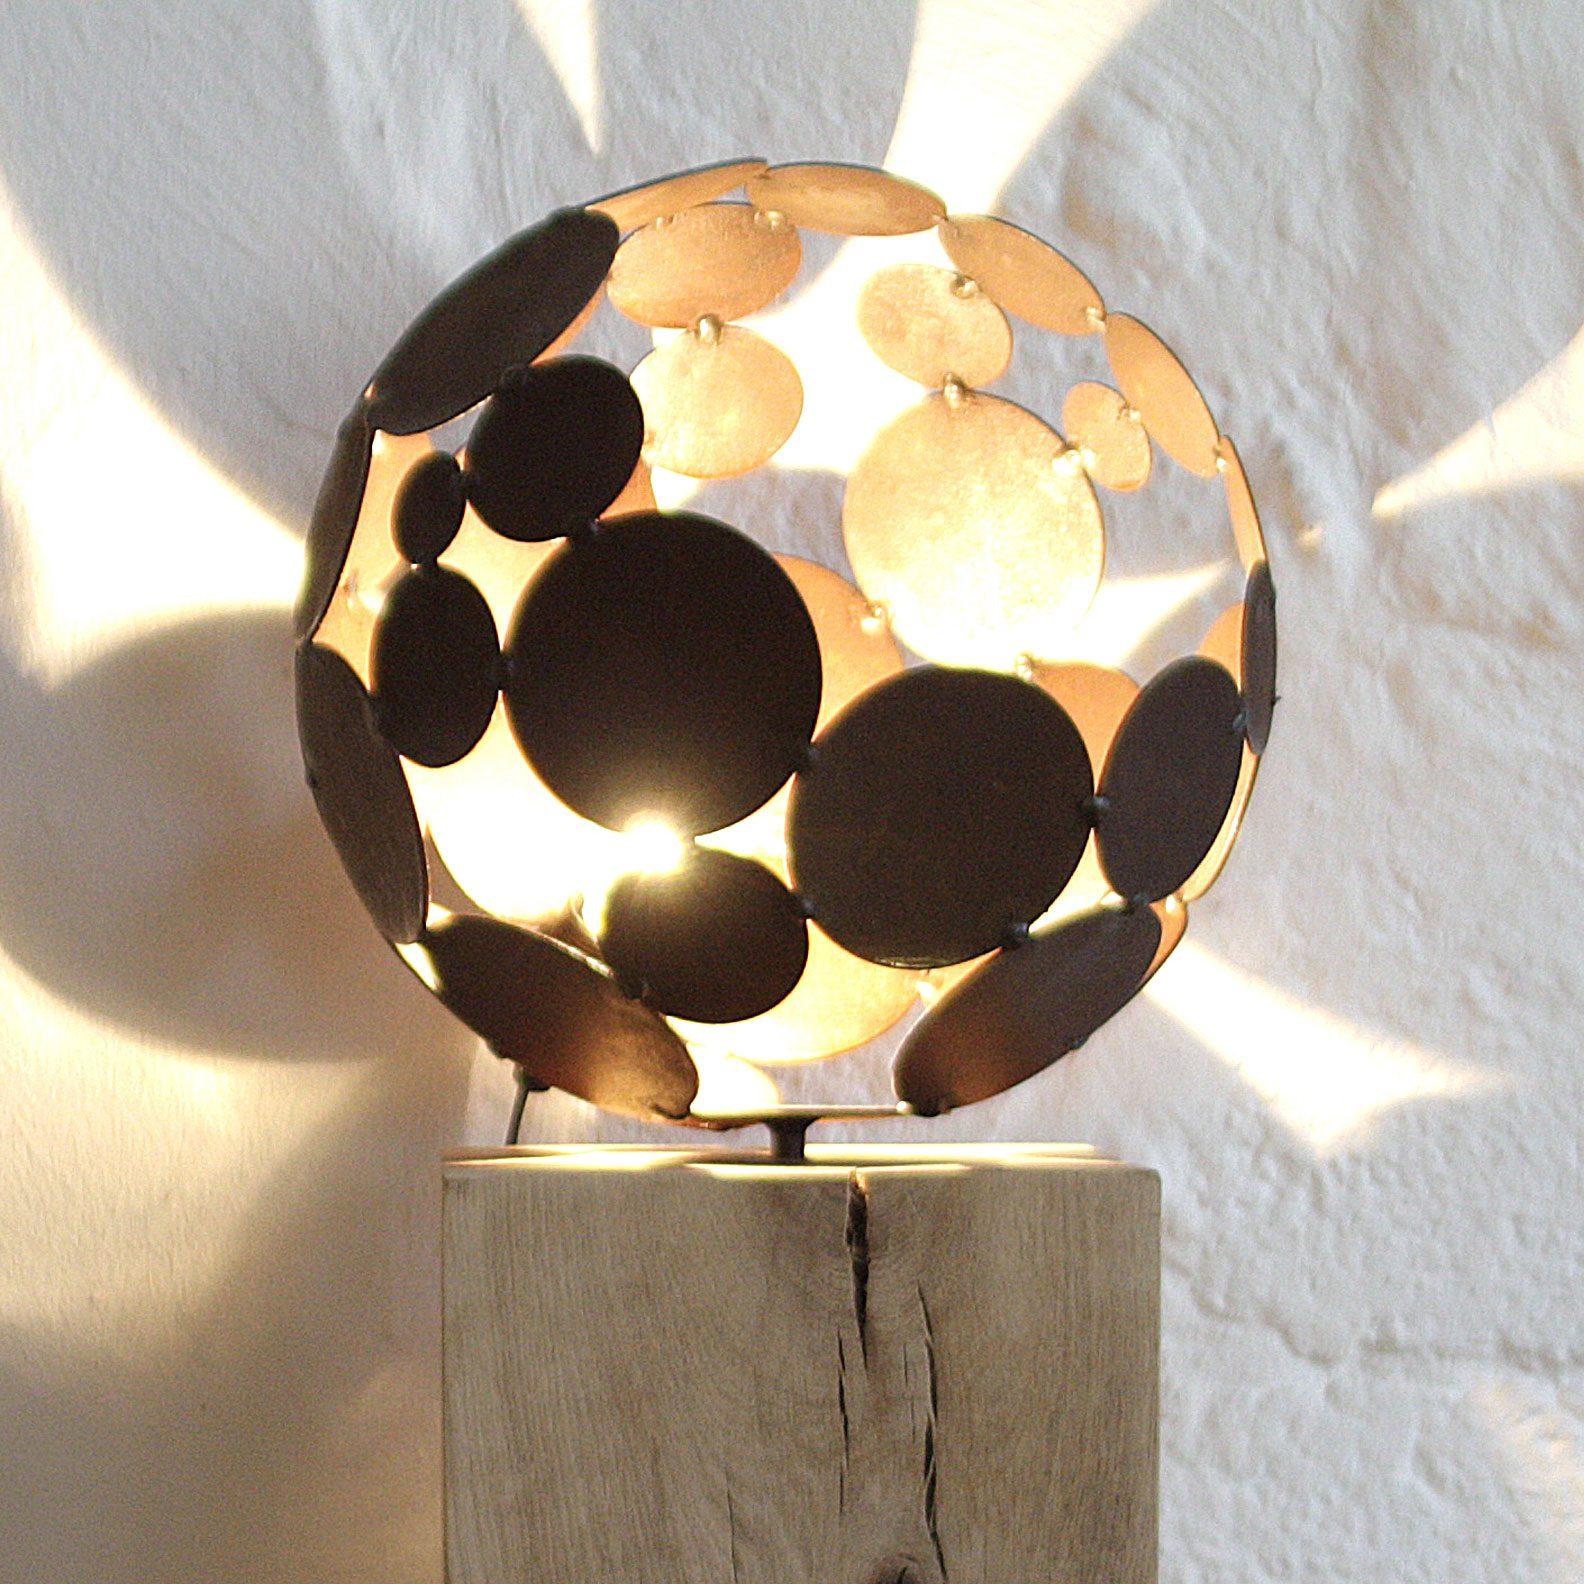 Ball lamp d = 28cm rust with natural oak base 20x20x78cm.
Customization possible and designed in 2010.
Also available to order in stainless steel.

You will find an exceptional and high-quality lamp here, which conjures up a beautiful shadow pattern